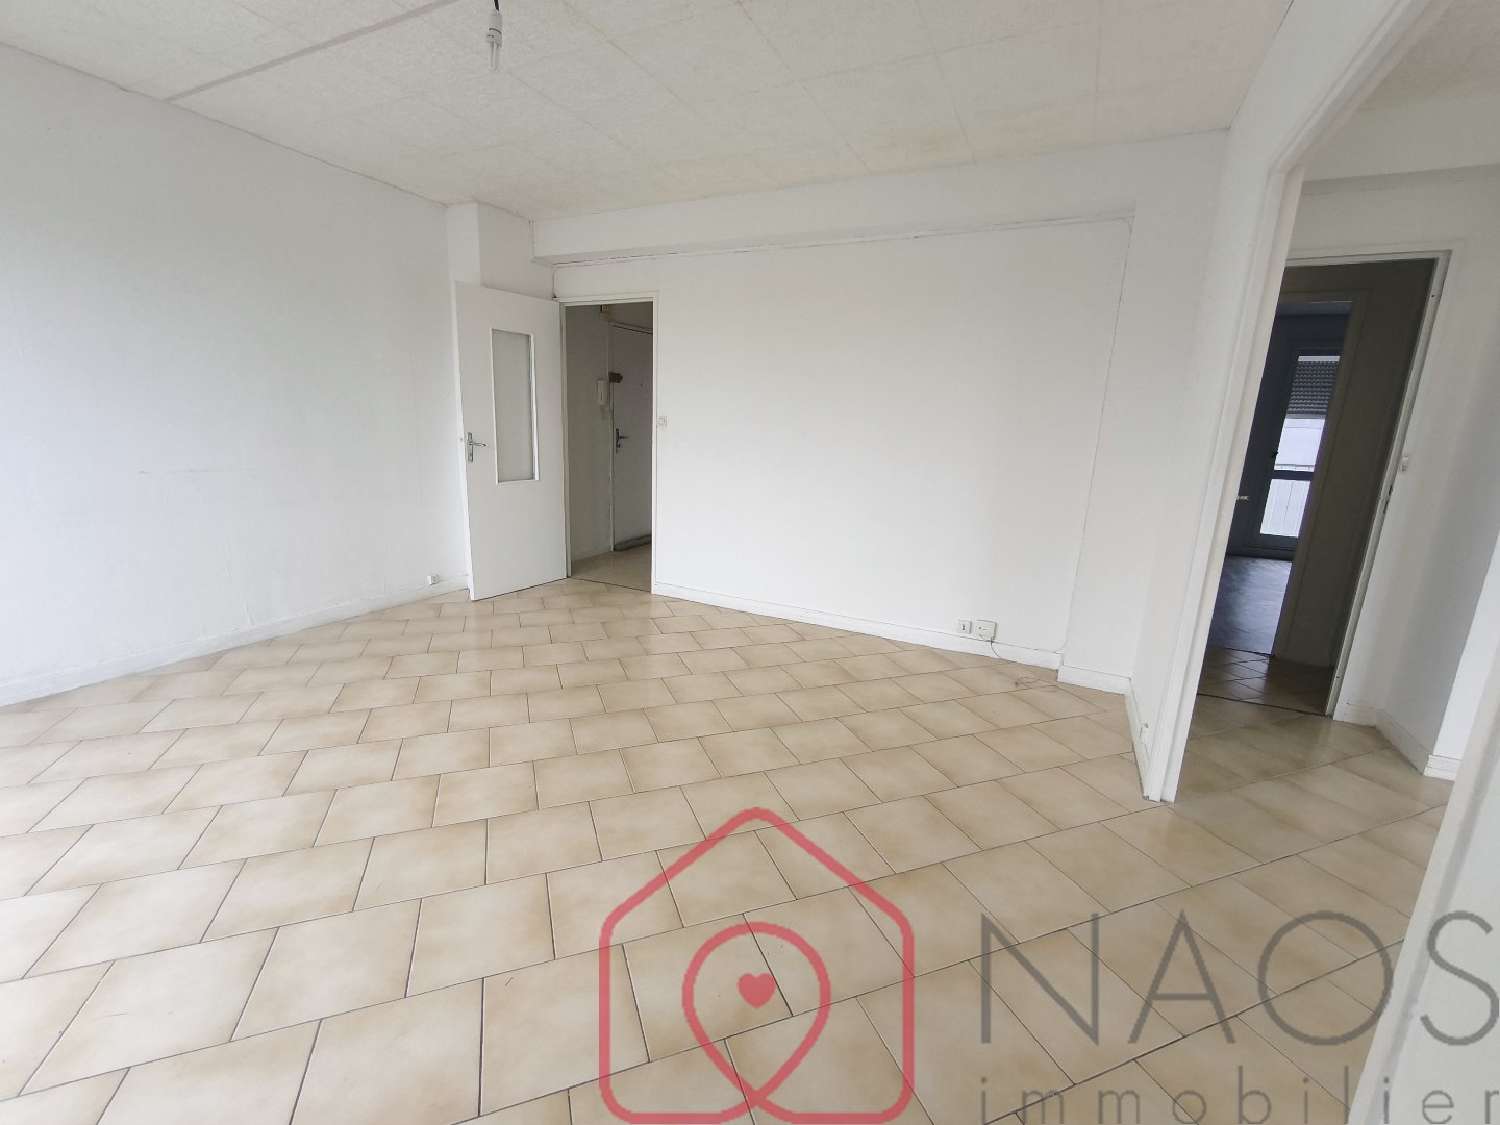  for sale apartment Amiens 80080 Somme 1